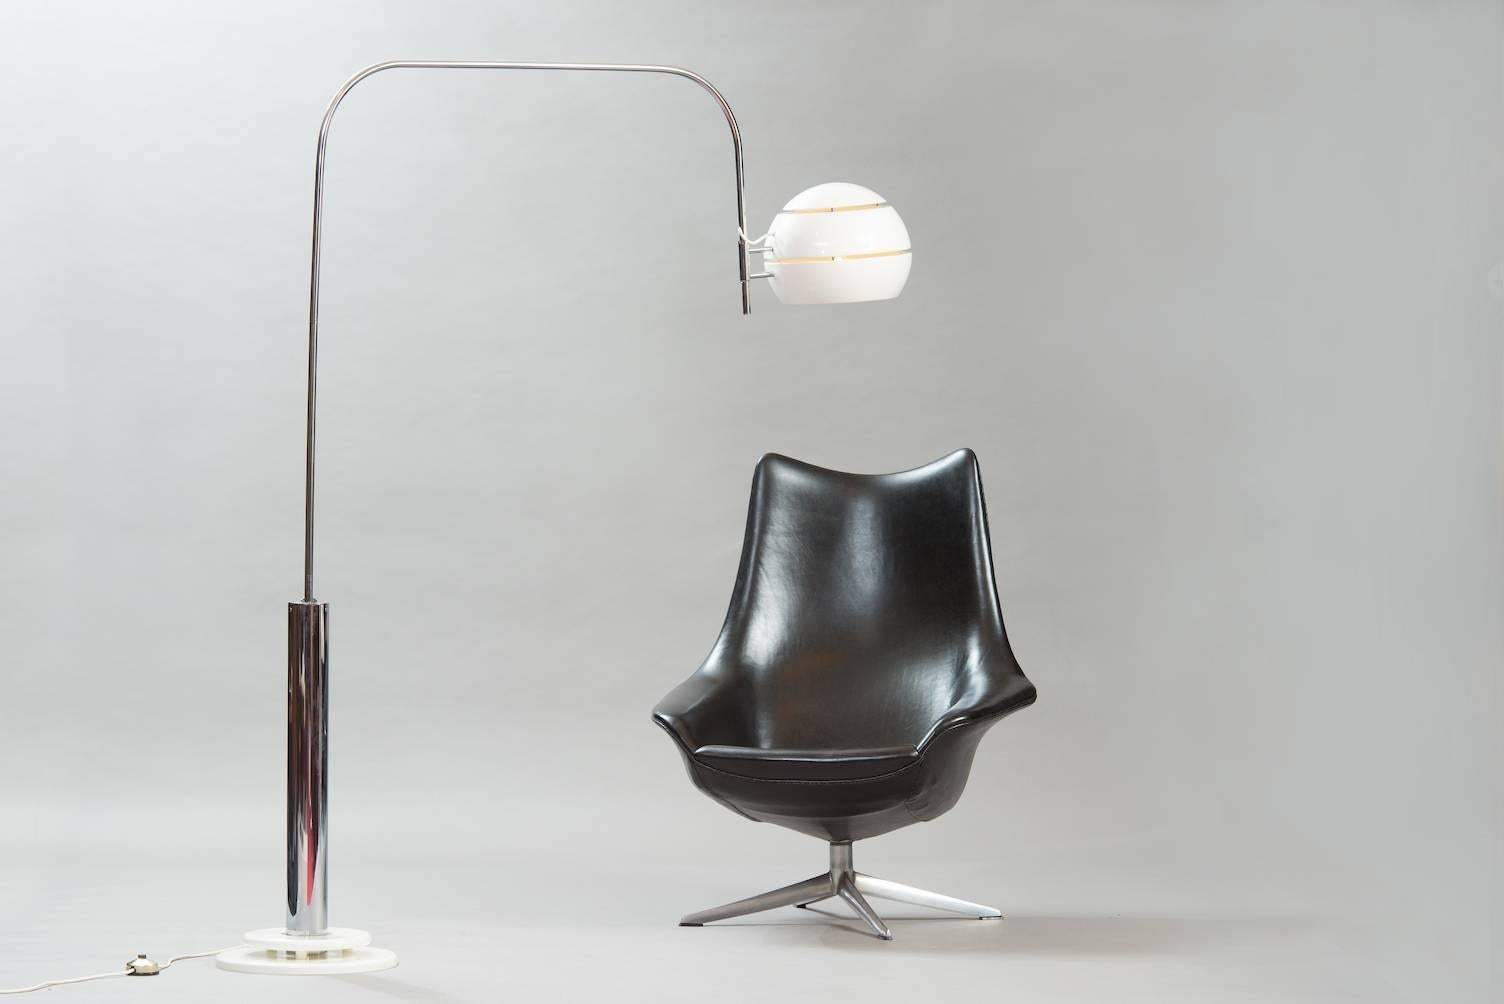 Arco floor lamp in chrome, white lacquered metal globe, and a white lacquered base, it rotates on itself and it’s adjustable in height.
Measure: H. 200 cm (max.), 78.74 in, arm length 135 cm – 53.14 in
D. 30 cm – 11.81 in (globe).